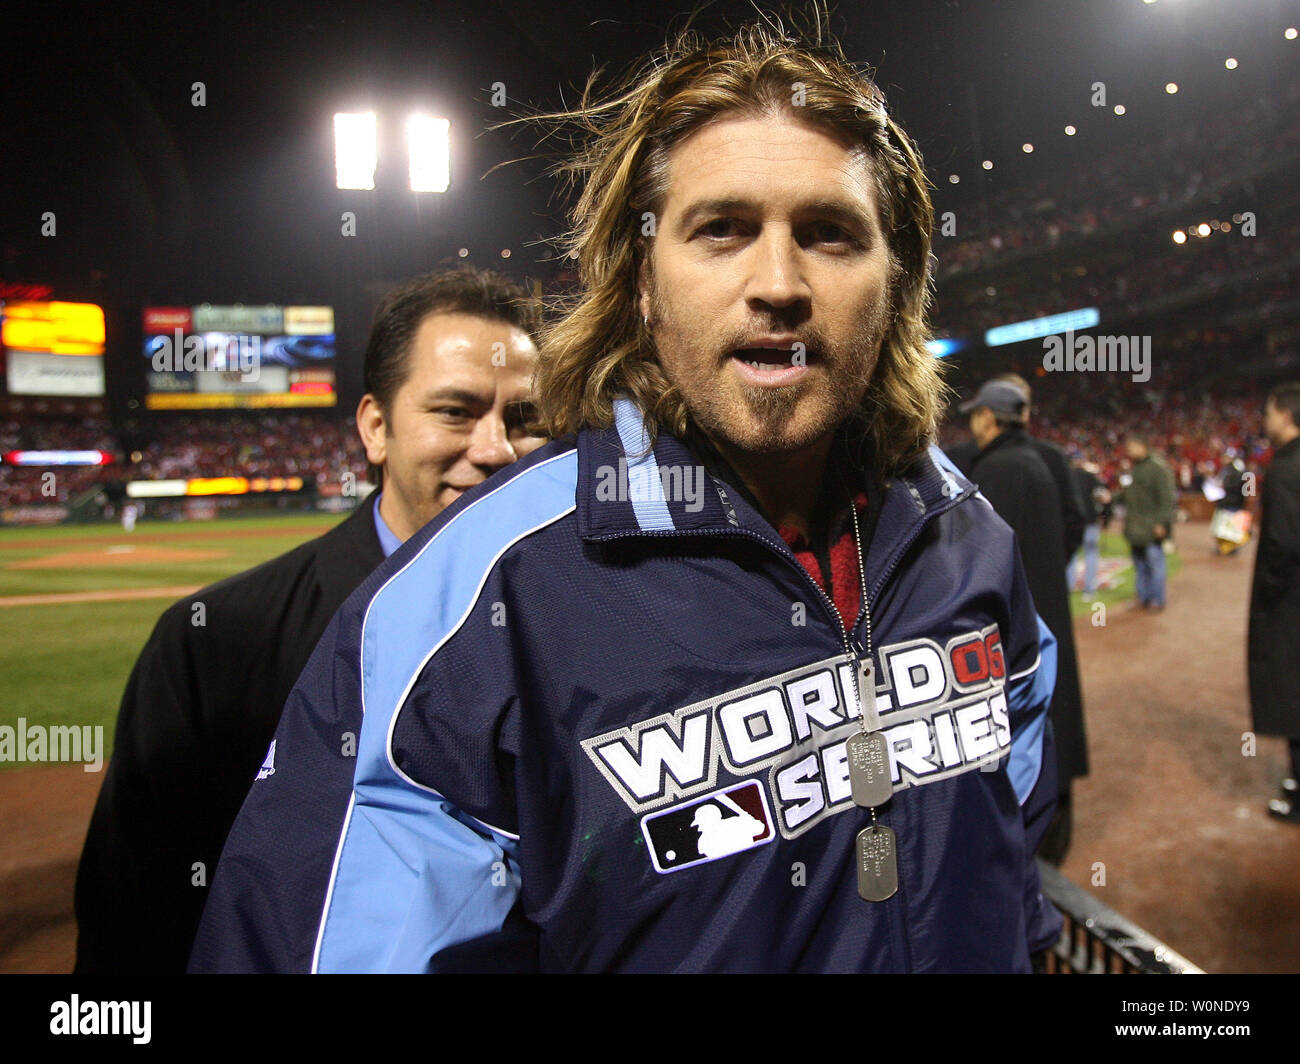 Singer Billy Ray Cyrus leaves the field after singing the National Anthem before Game 5 of the World Series between the St. Louis Cardinals and Detroit Tigers on October 27, 2006 in St. Louis. (UPI Photo/Bill Greenblatt) Stock Photo